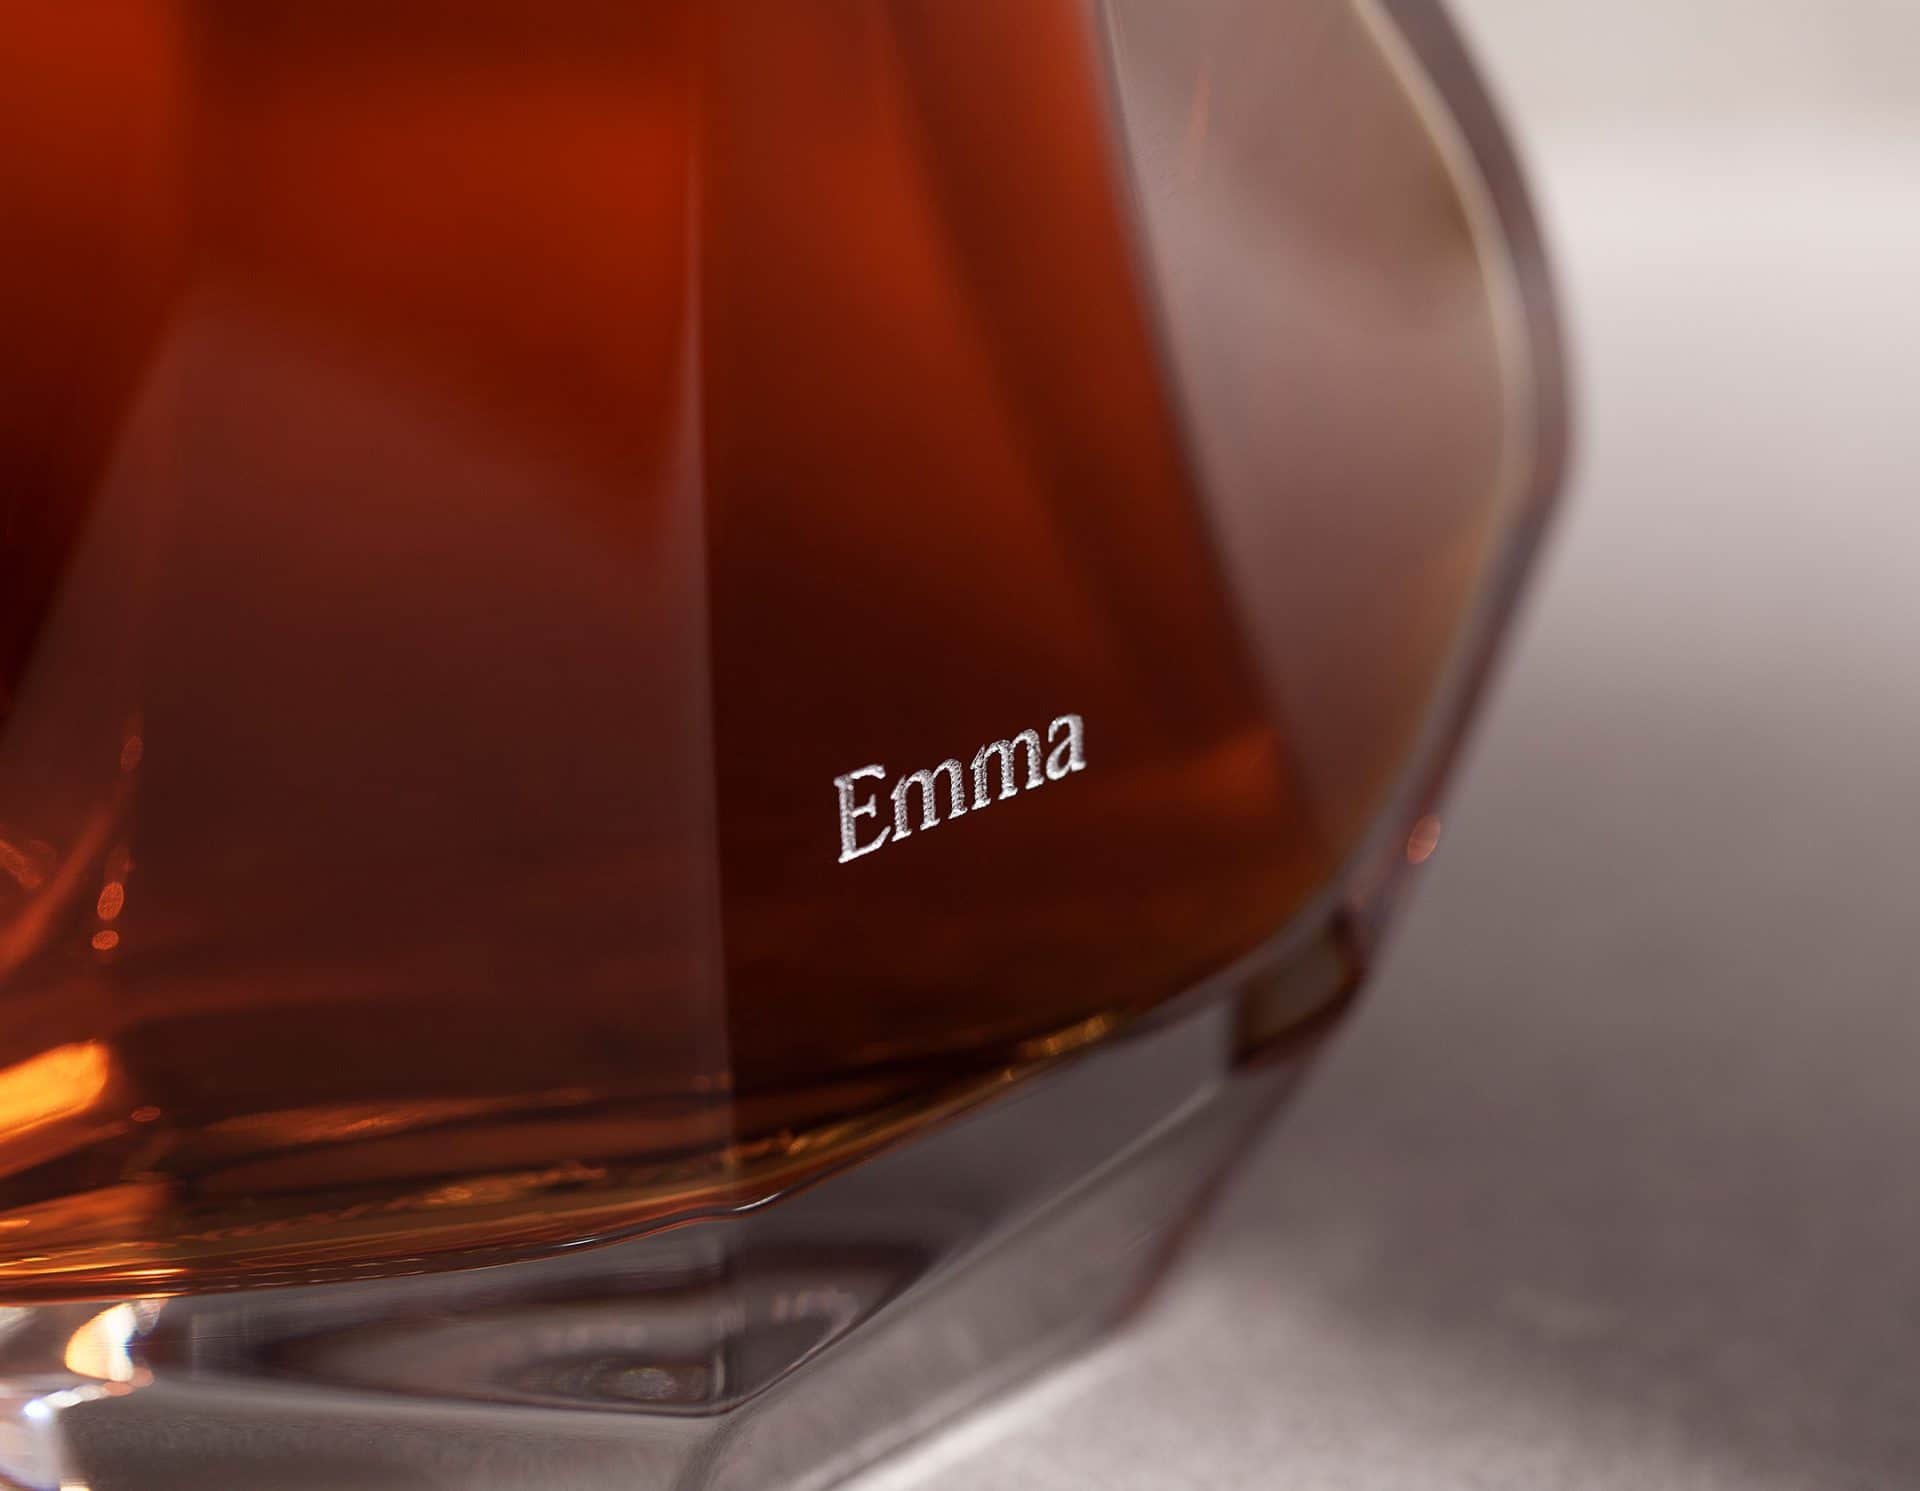 Engraving on crystal decanter